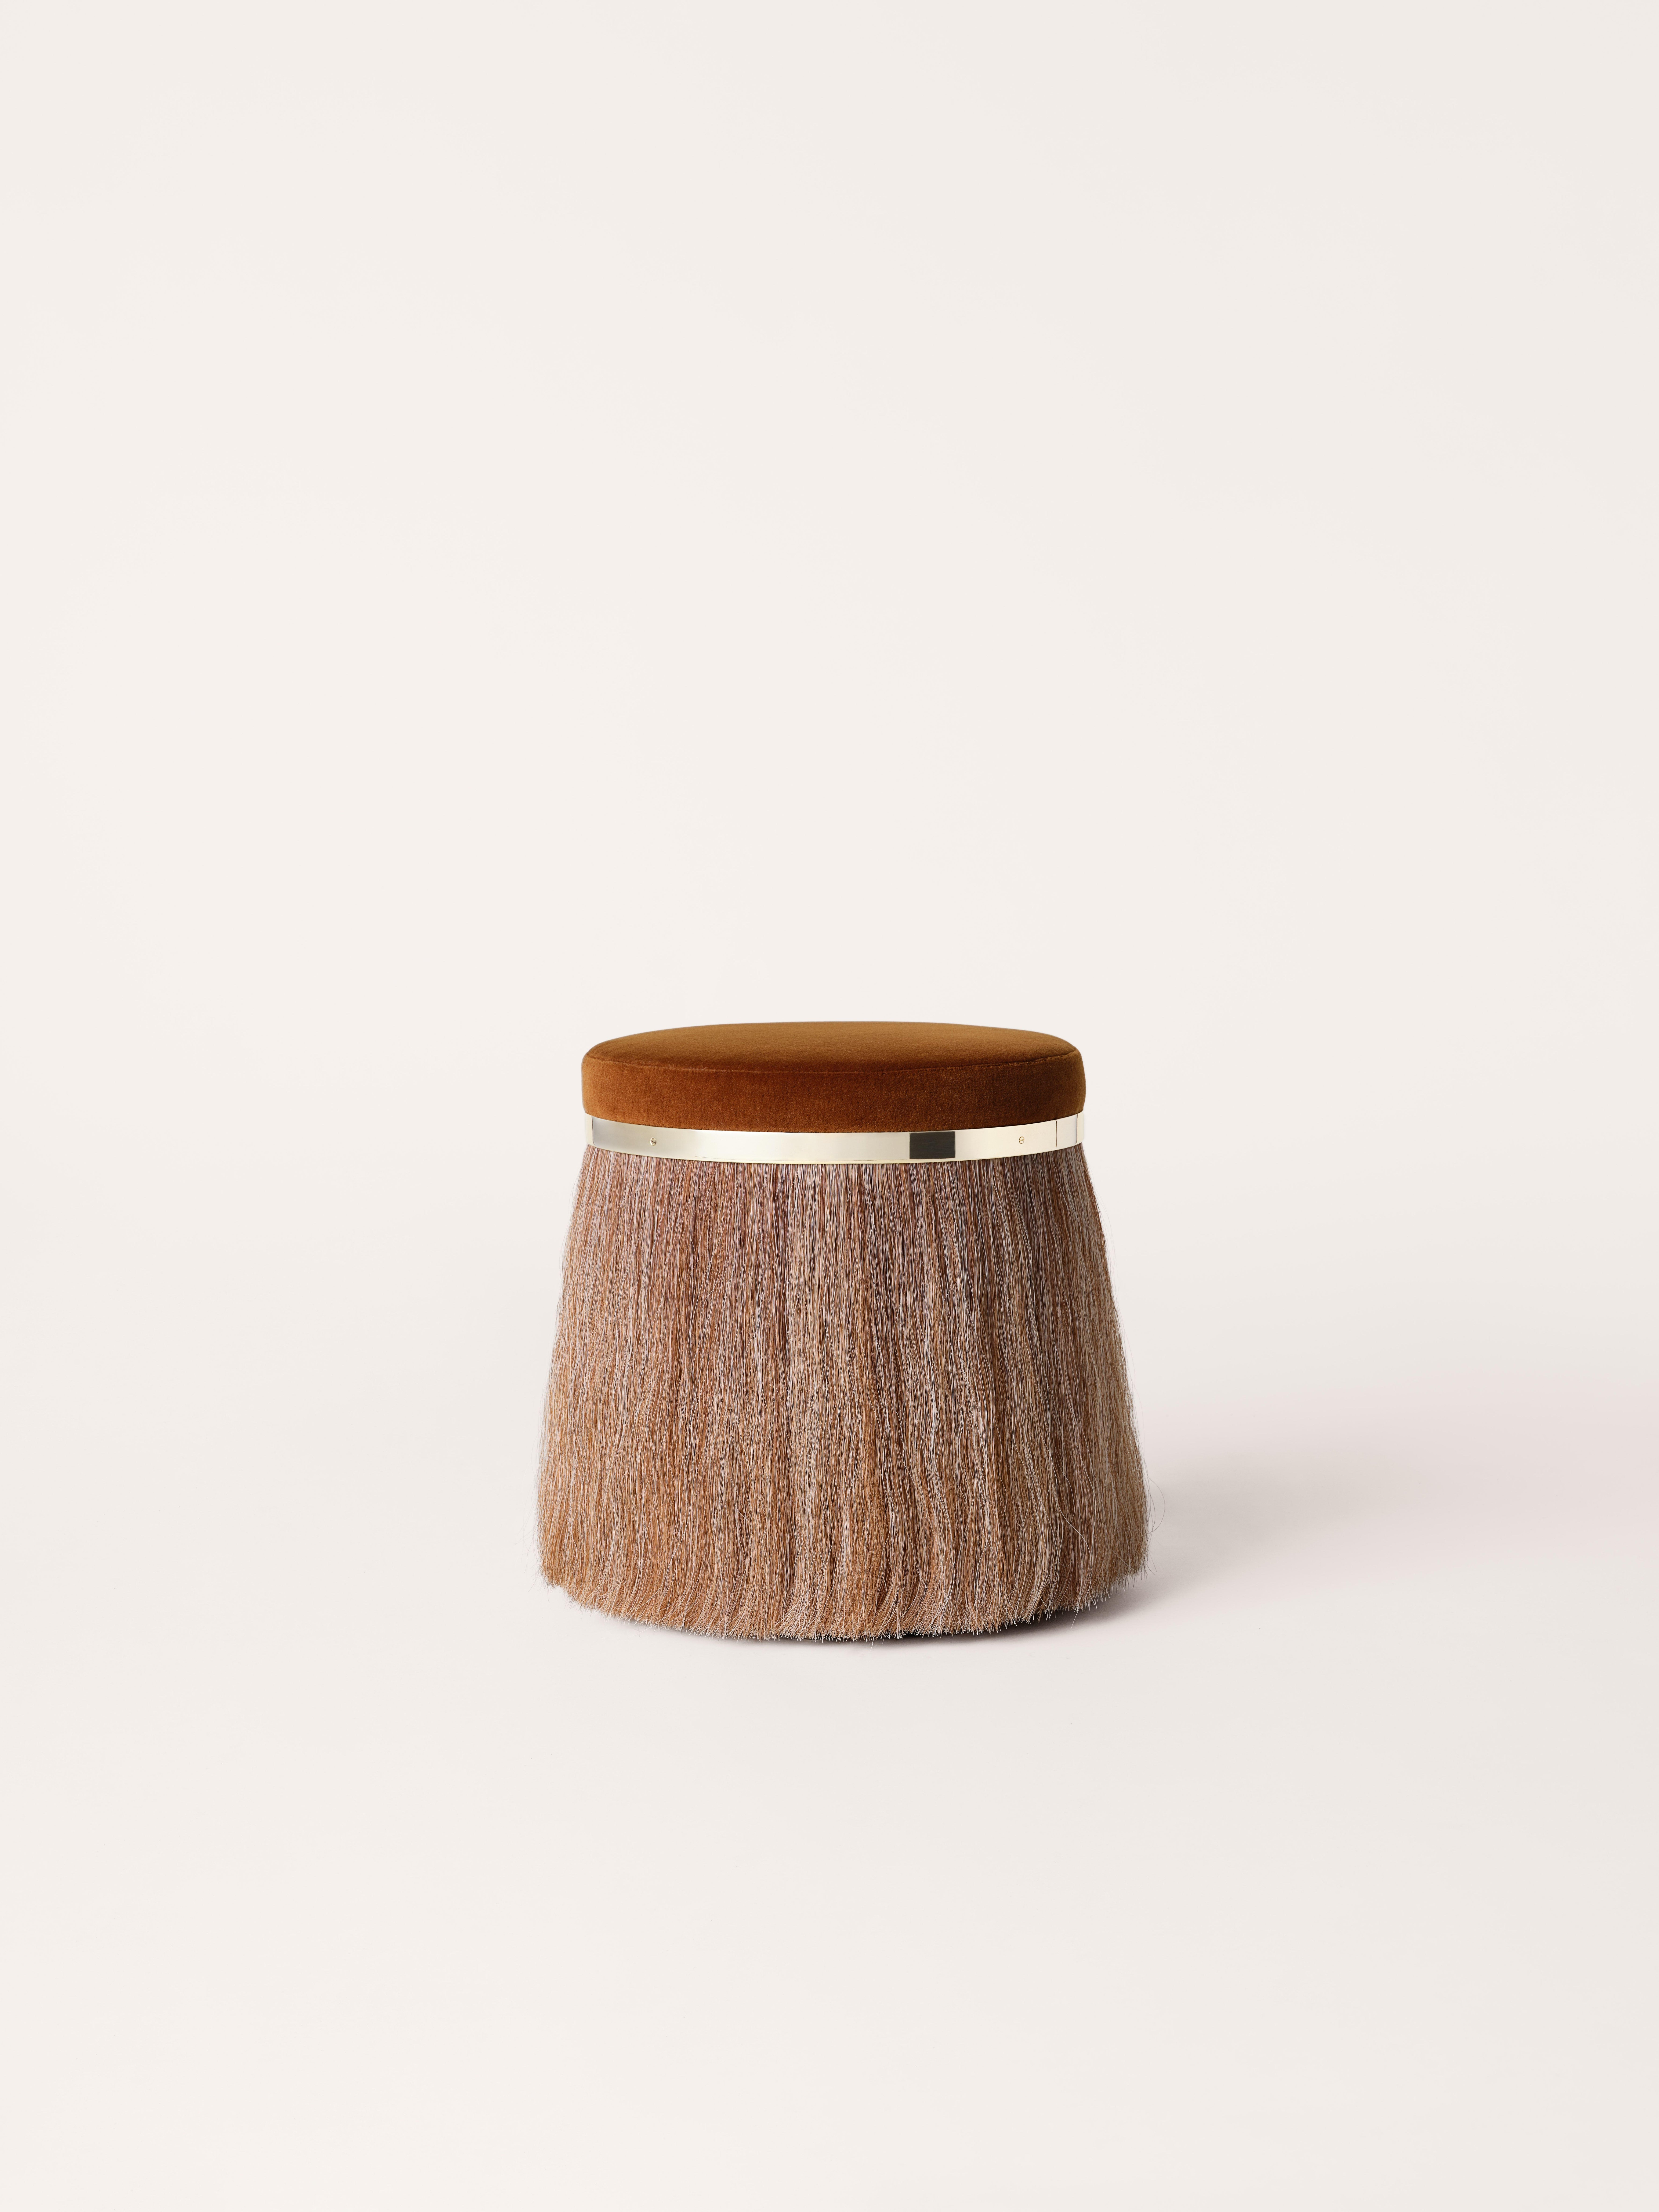 Konekt Thing 1 Stool with Oil-Rubbed Bronze, Horse Hair and Velvet In New Condition For Sale In New York, NY